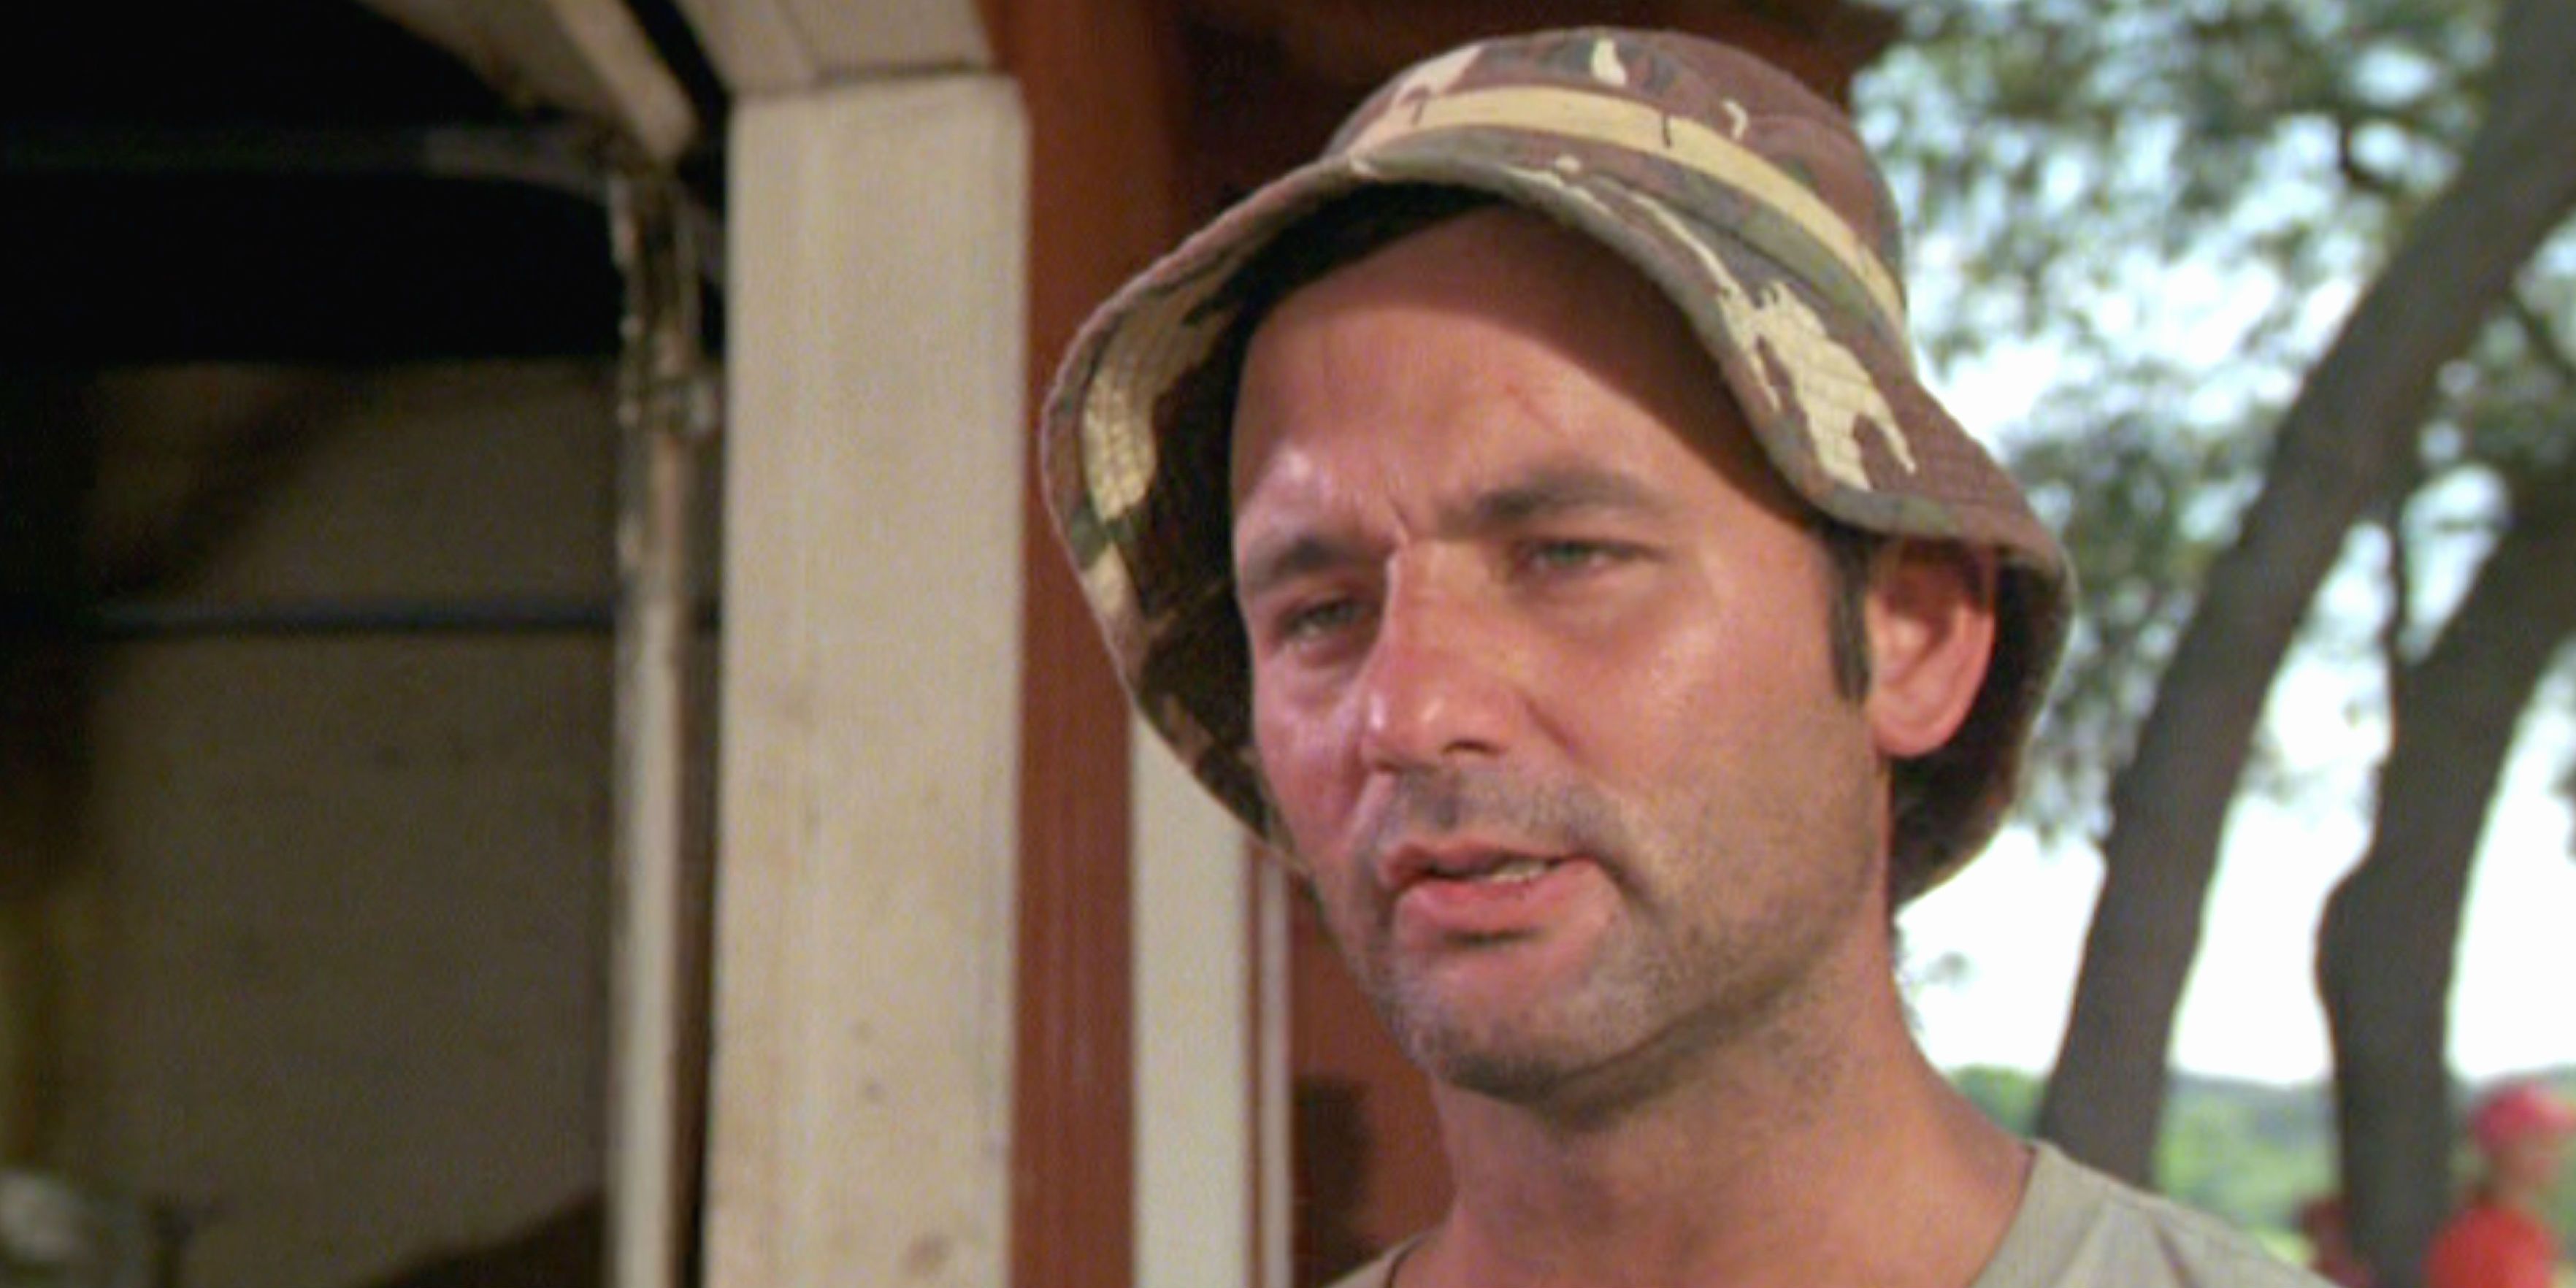 Bill Murray at the country club in Caddyshack